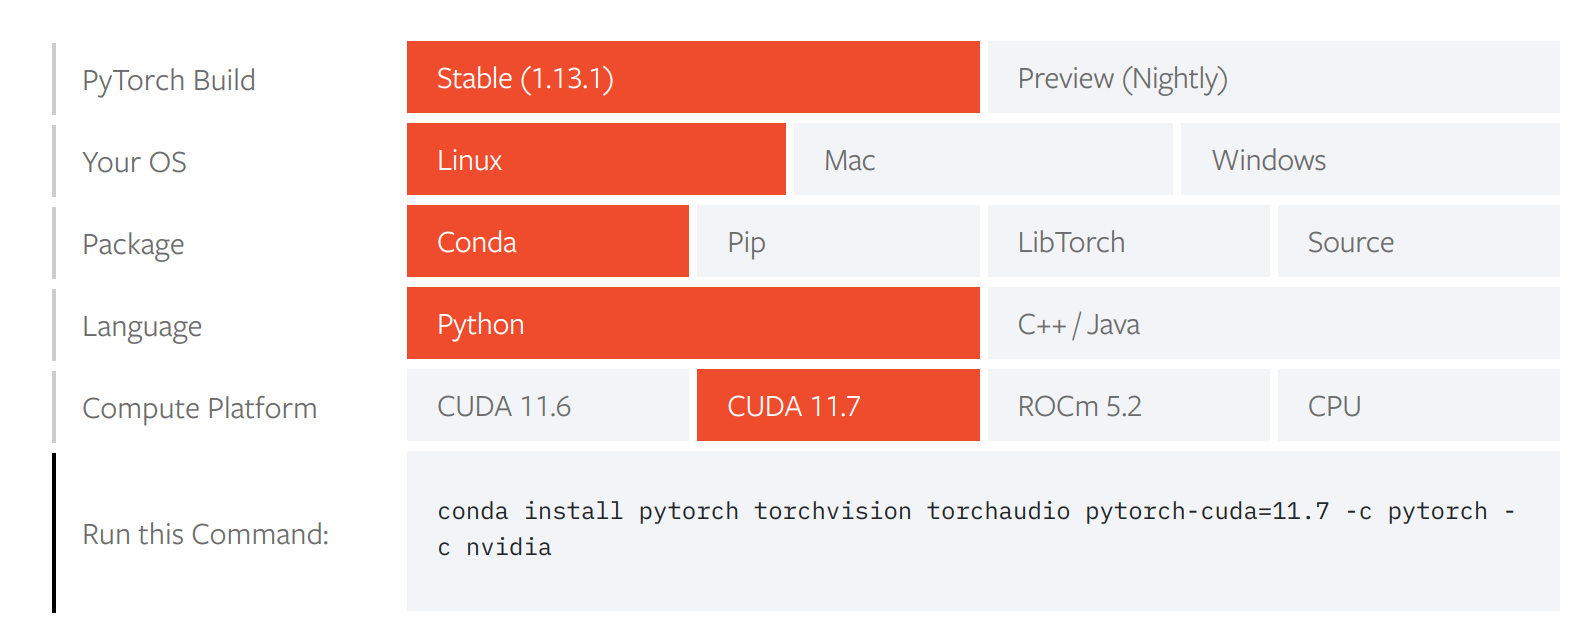 Is it possible to get the highest CUDA version supported by PyTorch via  python? - PyTorch Forums